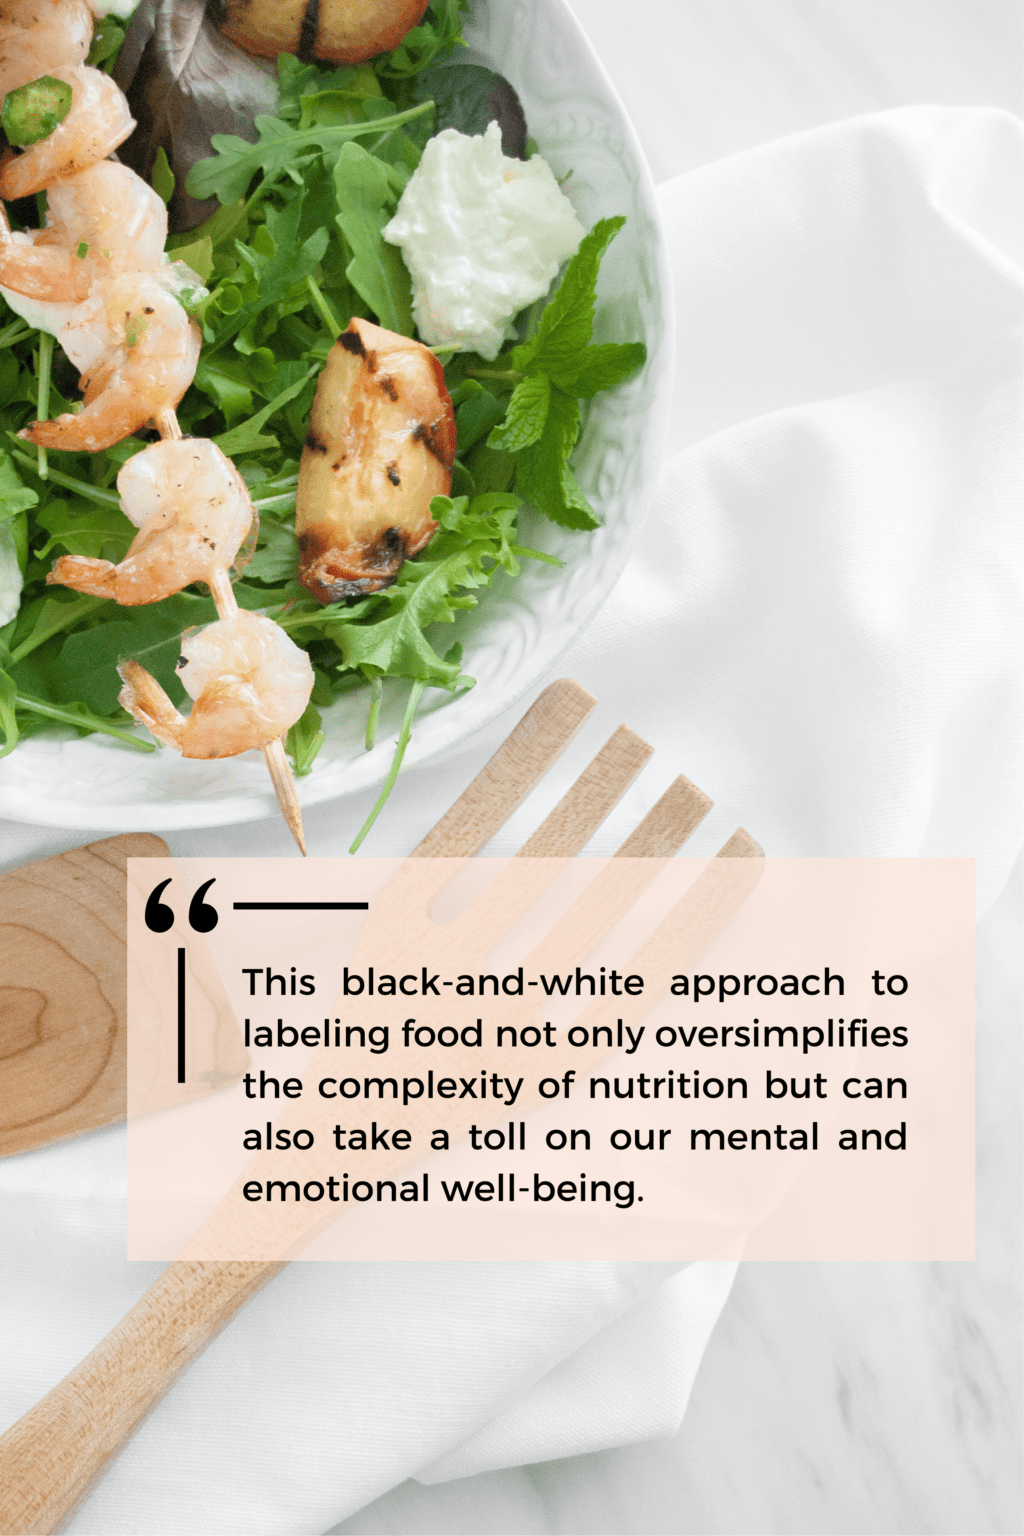 A plate of salad with a prawn skewer. The text overlay is a quote that reads "This black-and-white approach to labeling food not only oversimplifies the complexity of nutrition but can also take a toll on our mental and emotional well-being."